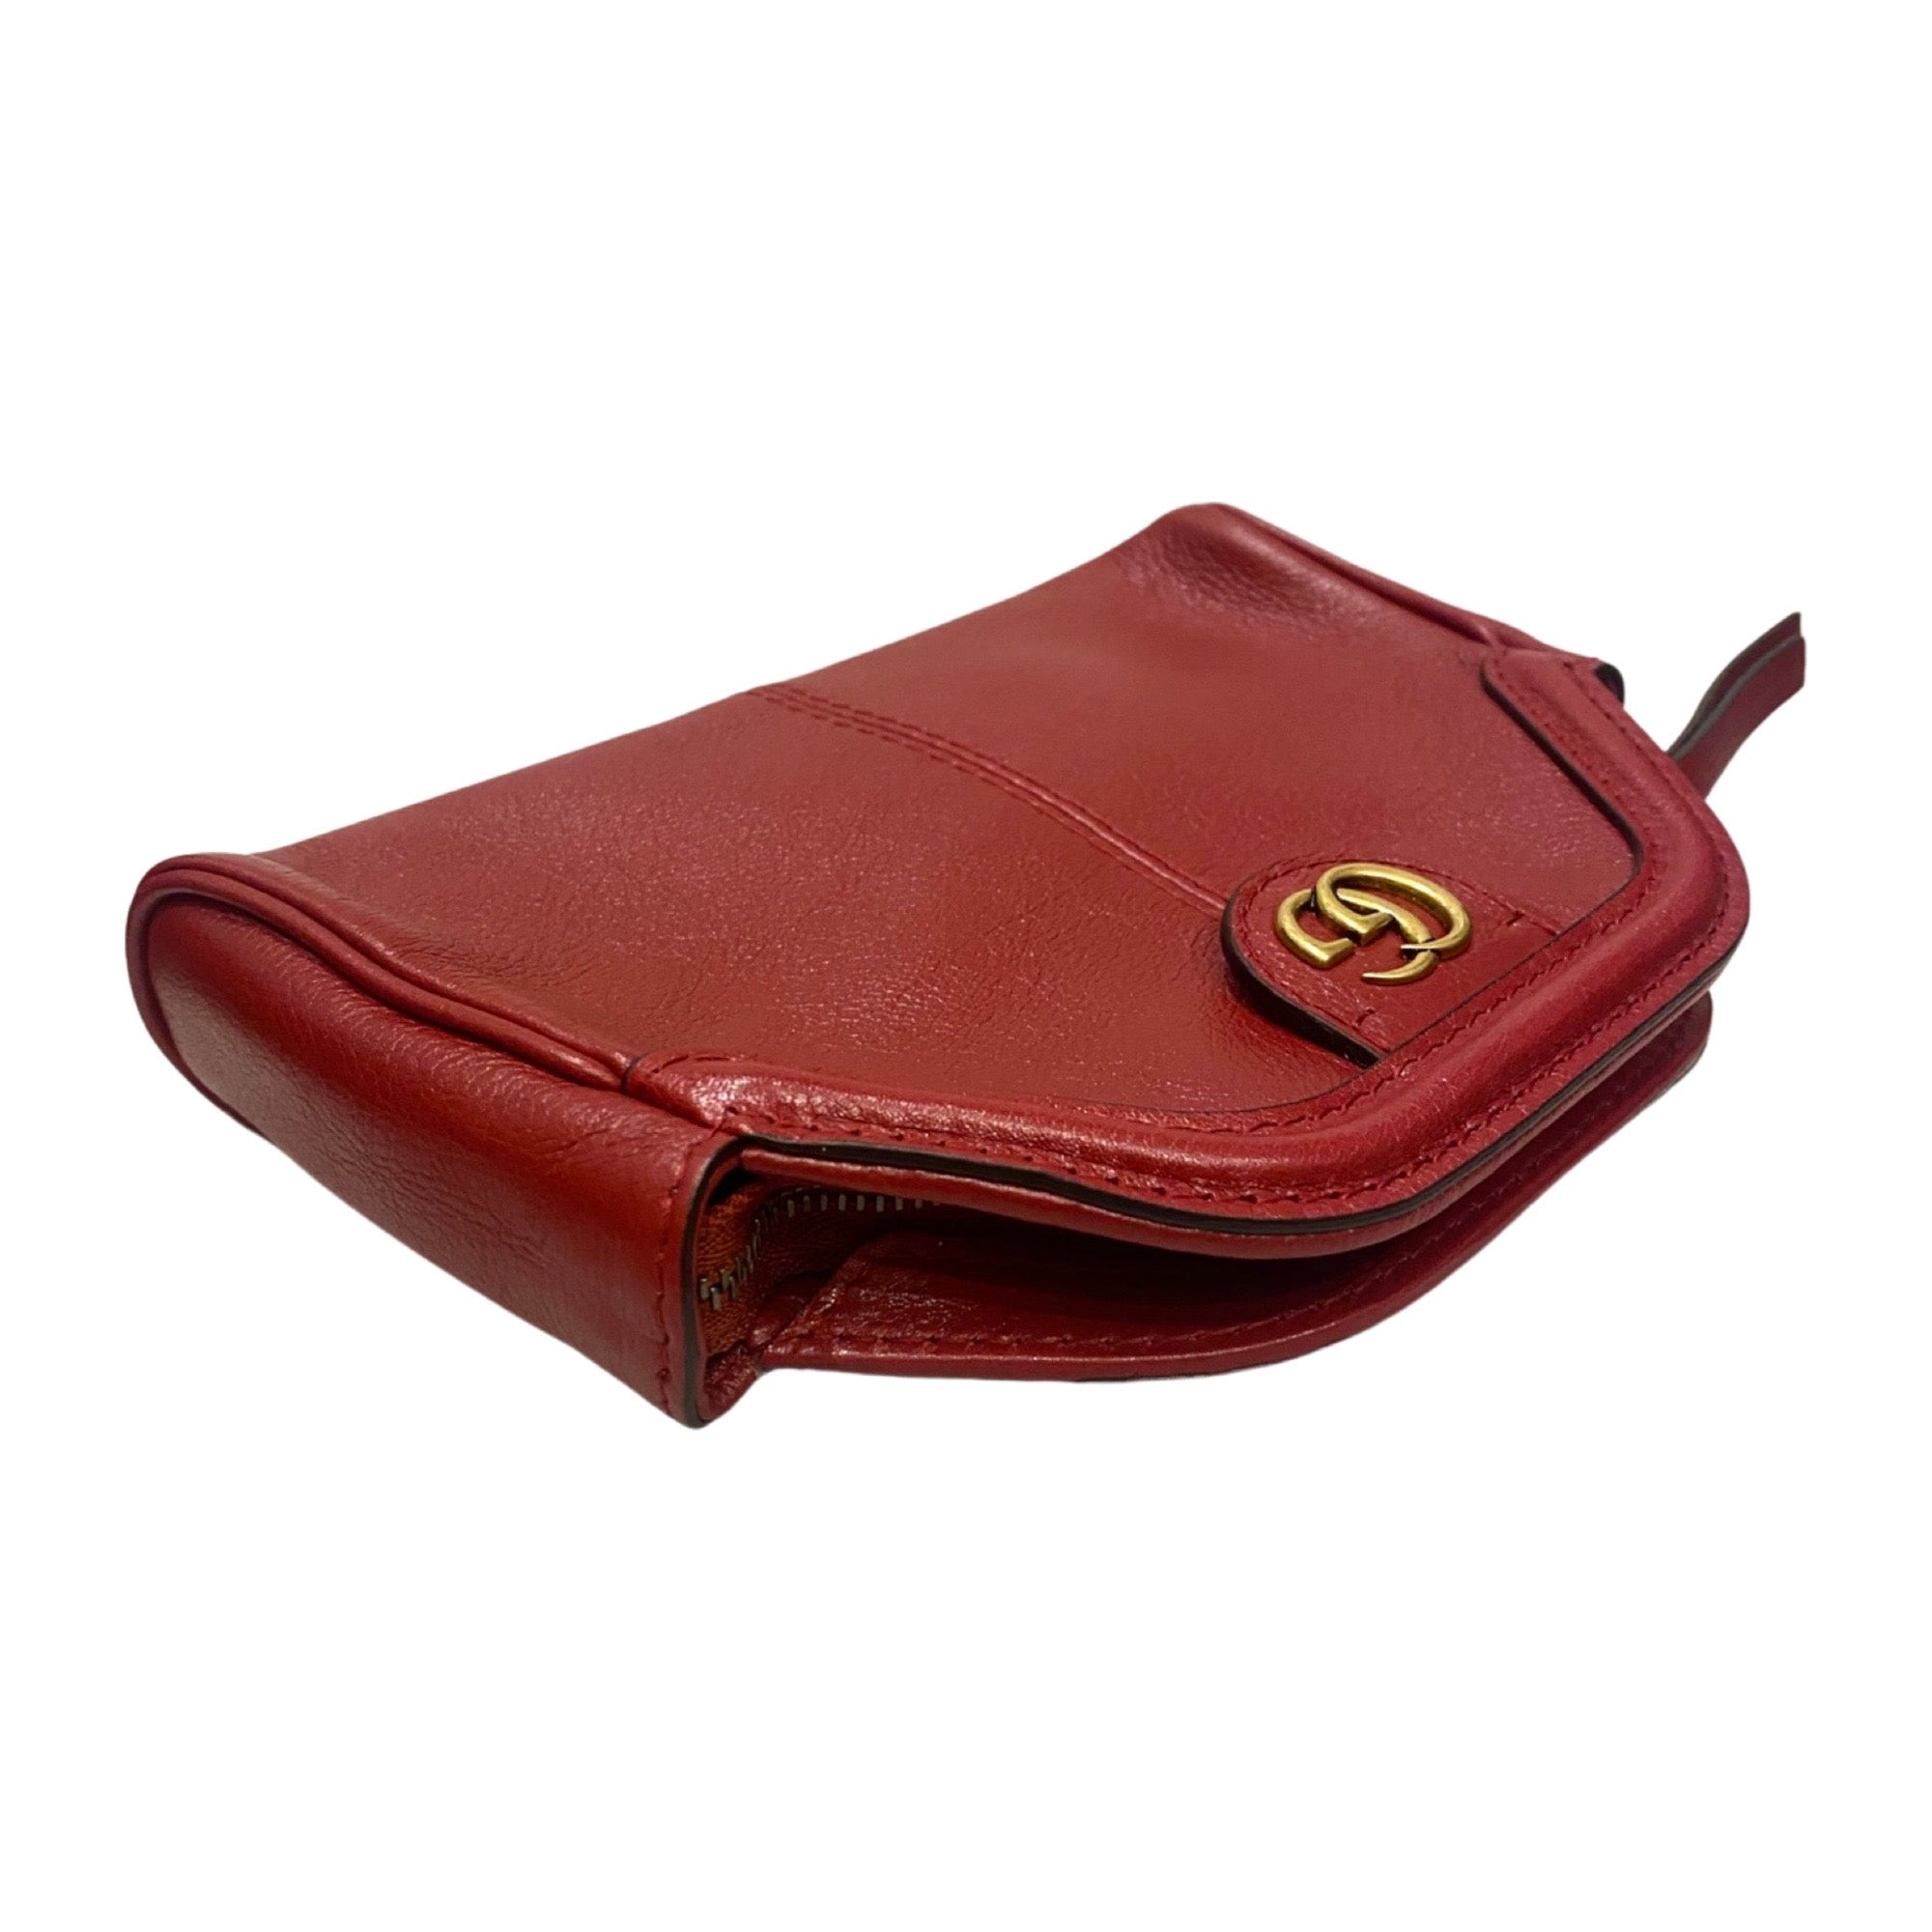 Gucci Rebelle Red Calf Leather Small Pouch Clutch Bag